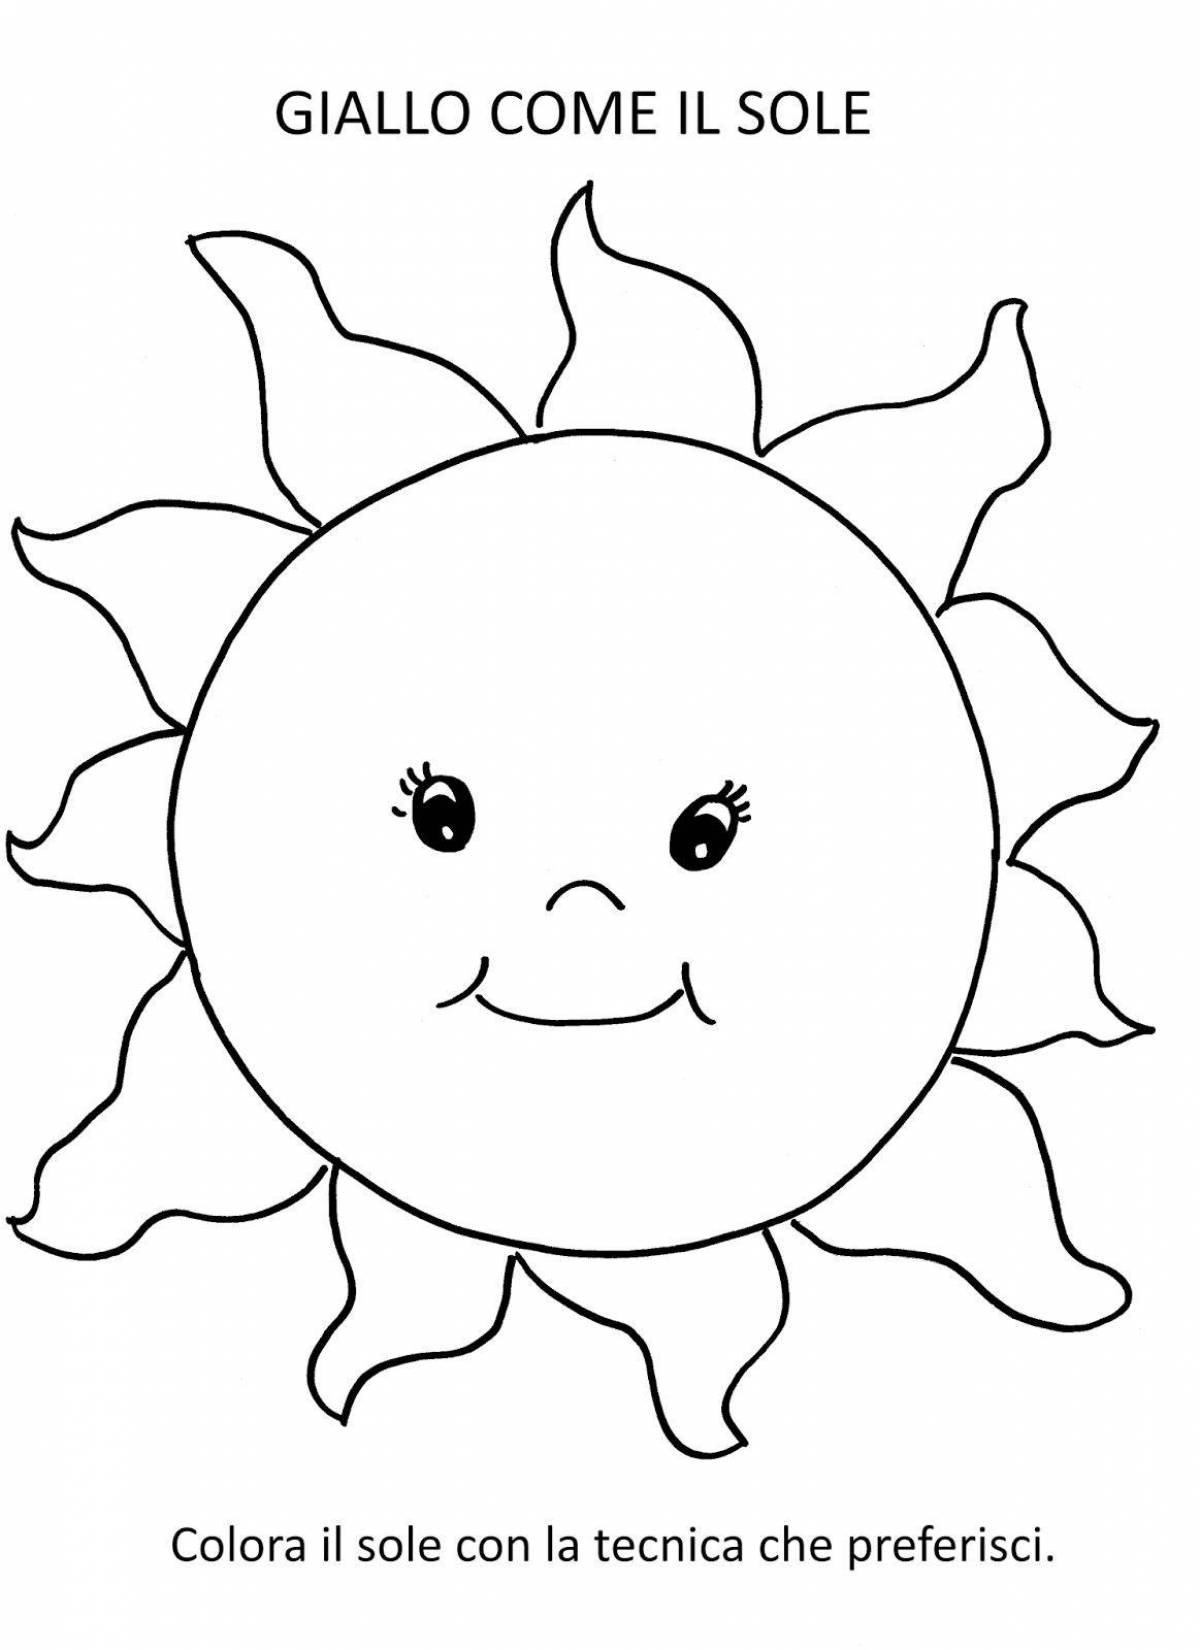 Exquisite sun coloring book for 3-4 year olds